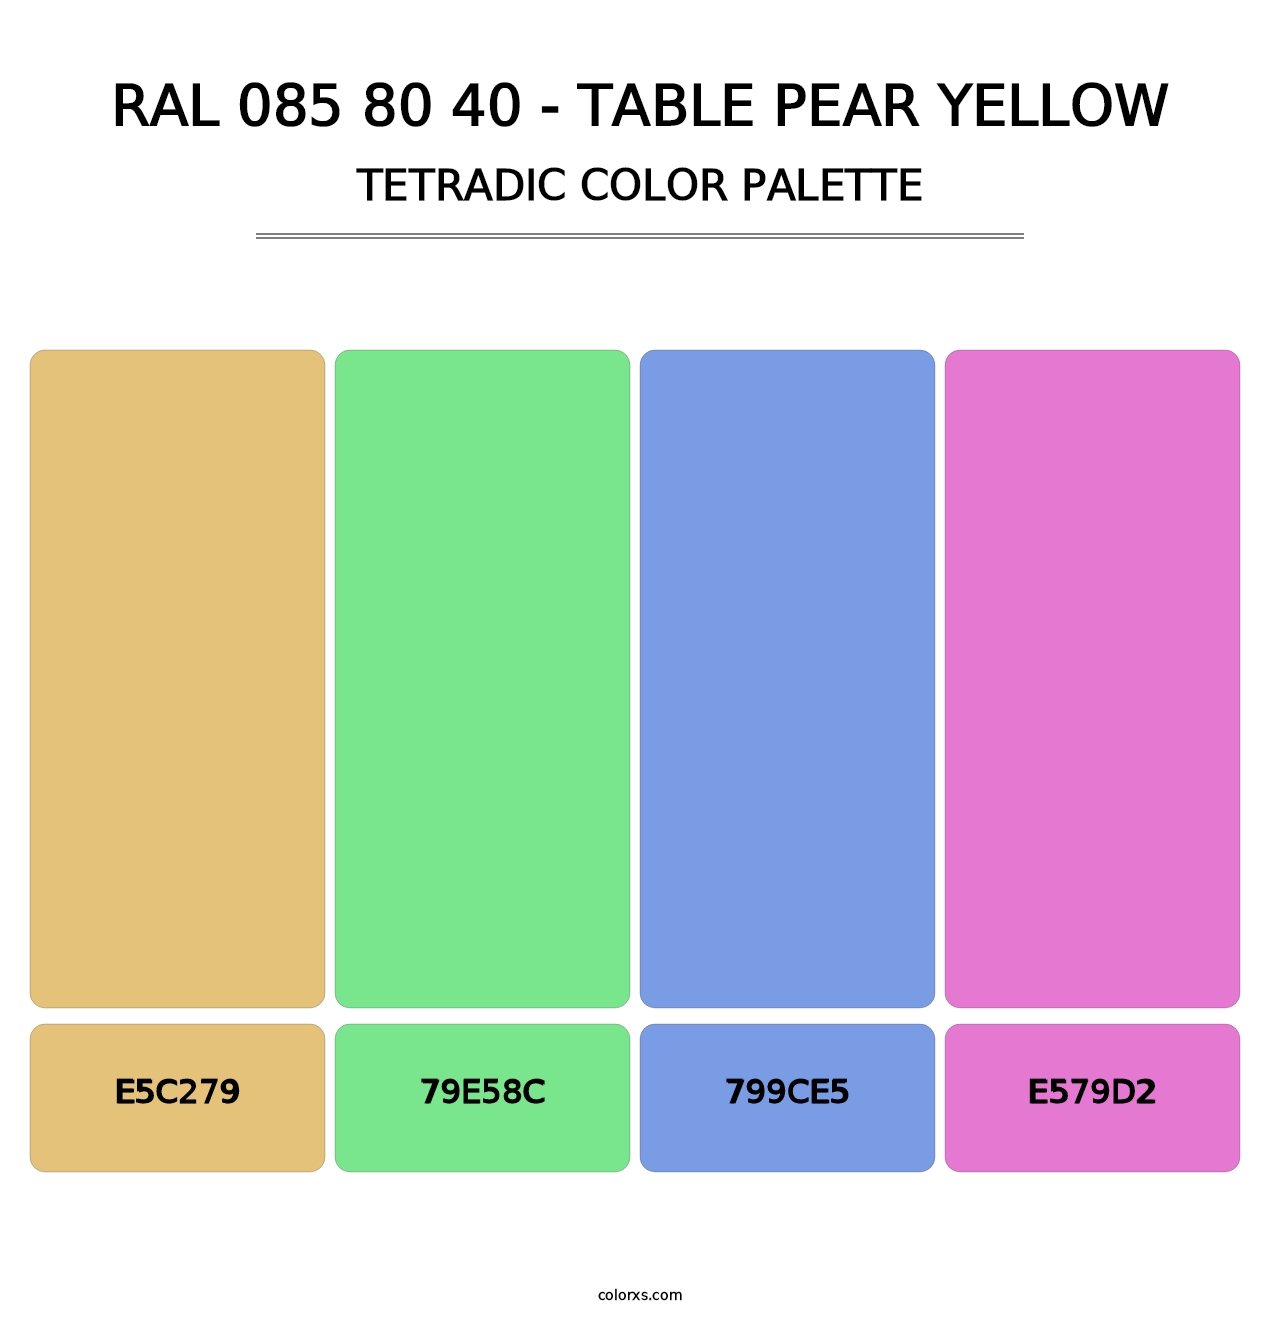 RAL 085 80 40 - Table Pear Yellow - Tetradic Color Palette